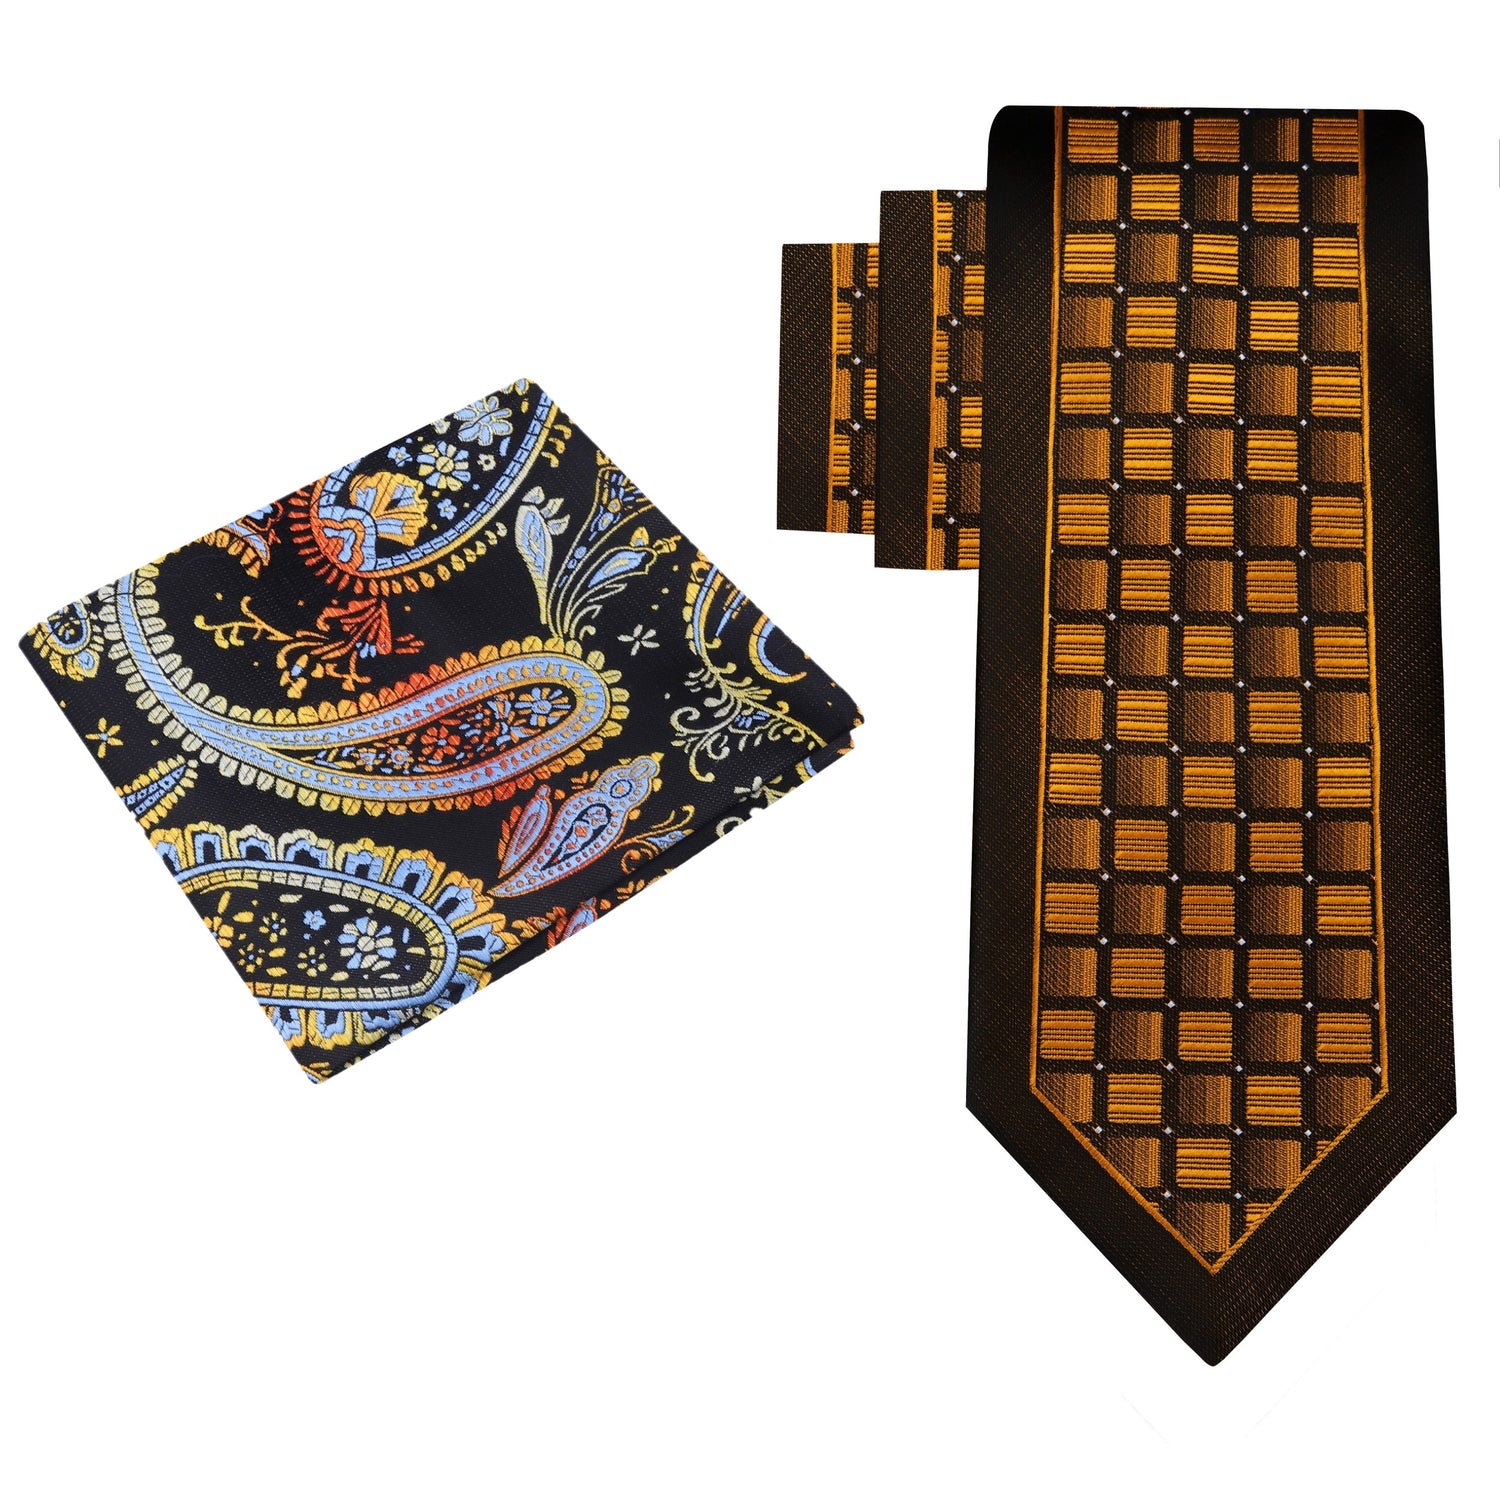 Alt View: Golden Brown Geometric Tie and Brown, Yellow and Red Paisley Square